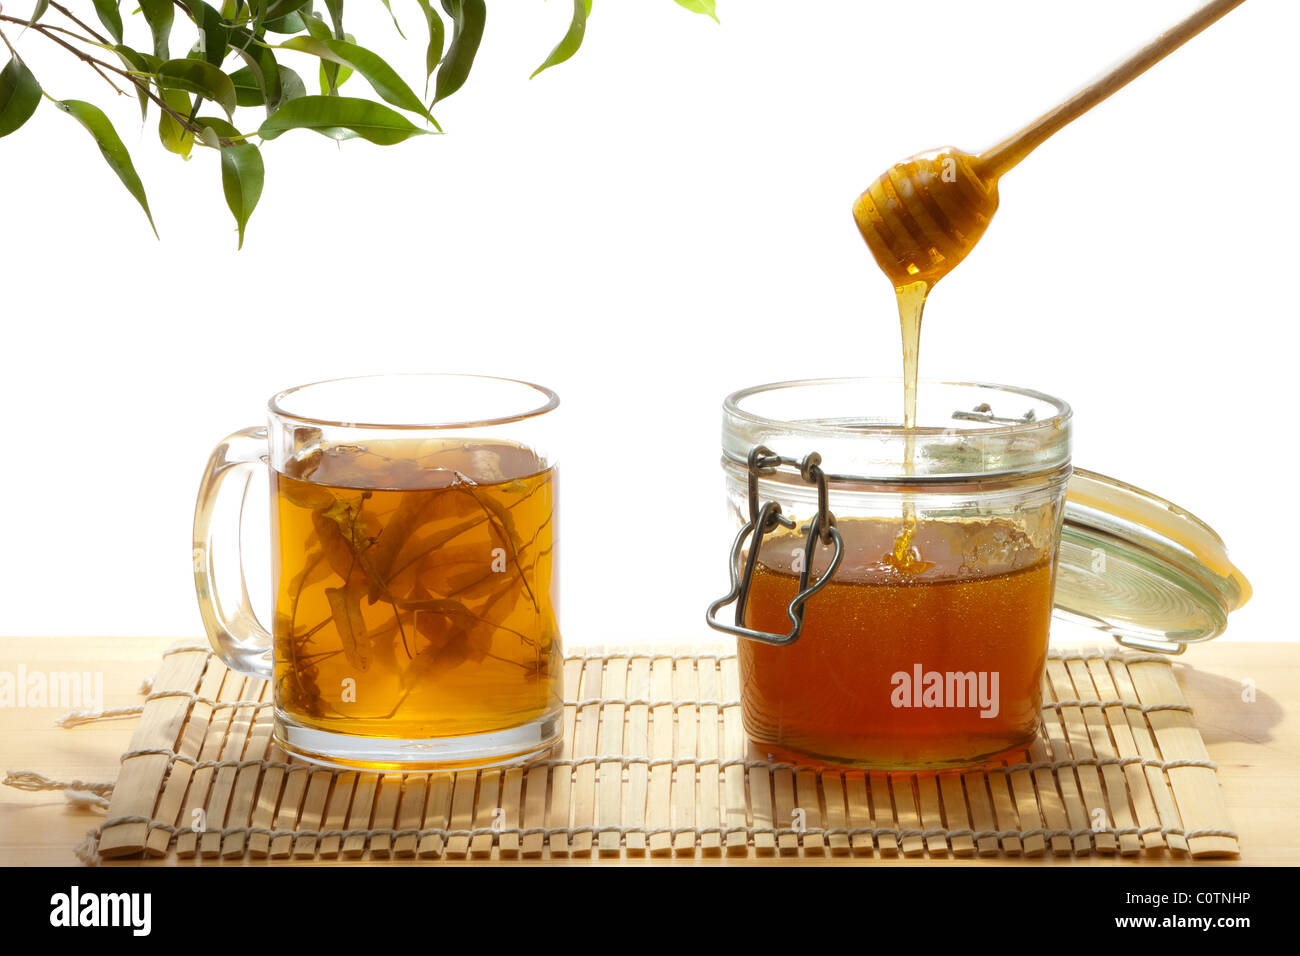 Honey and tea from lime tree Stock Photo